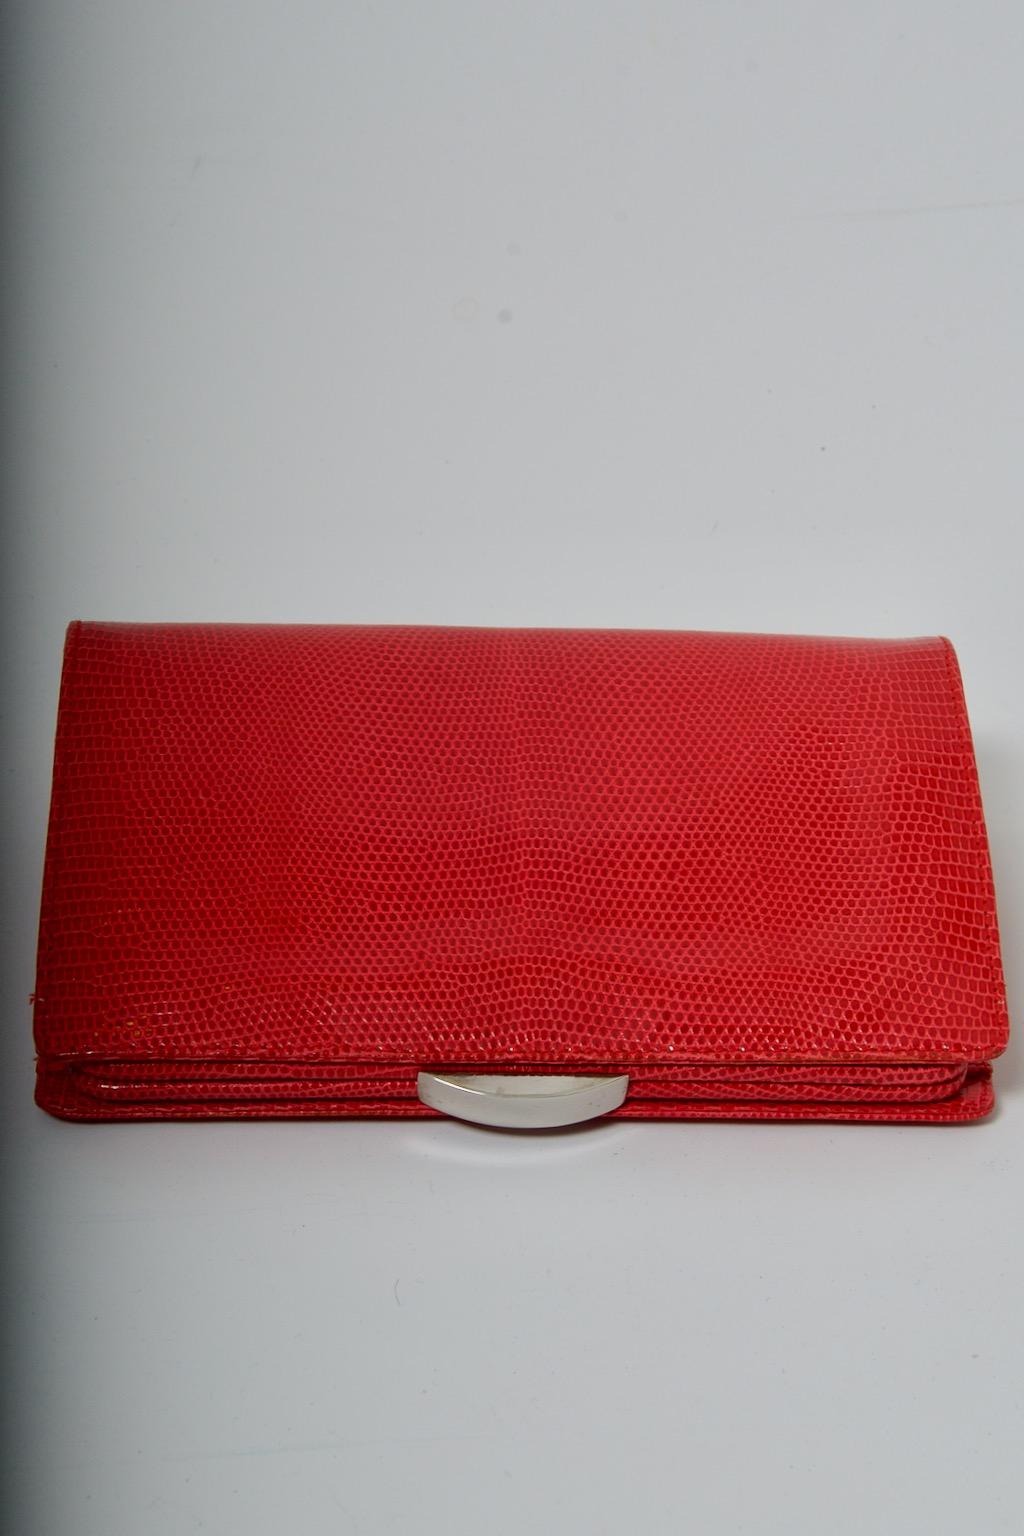 Suarez Red Lizard Covertible Clutch For Sale 2